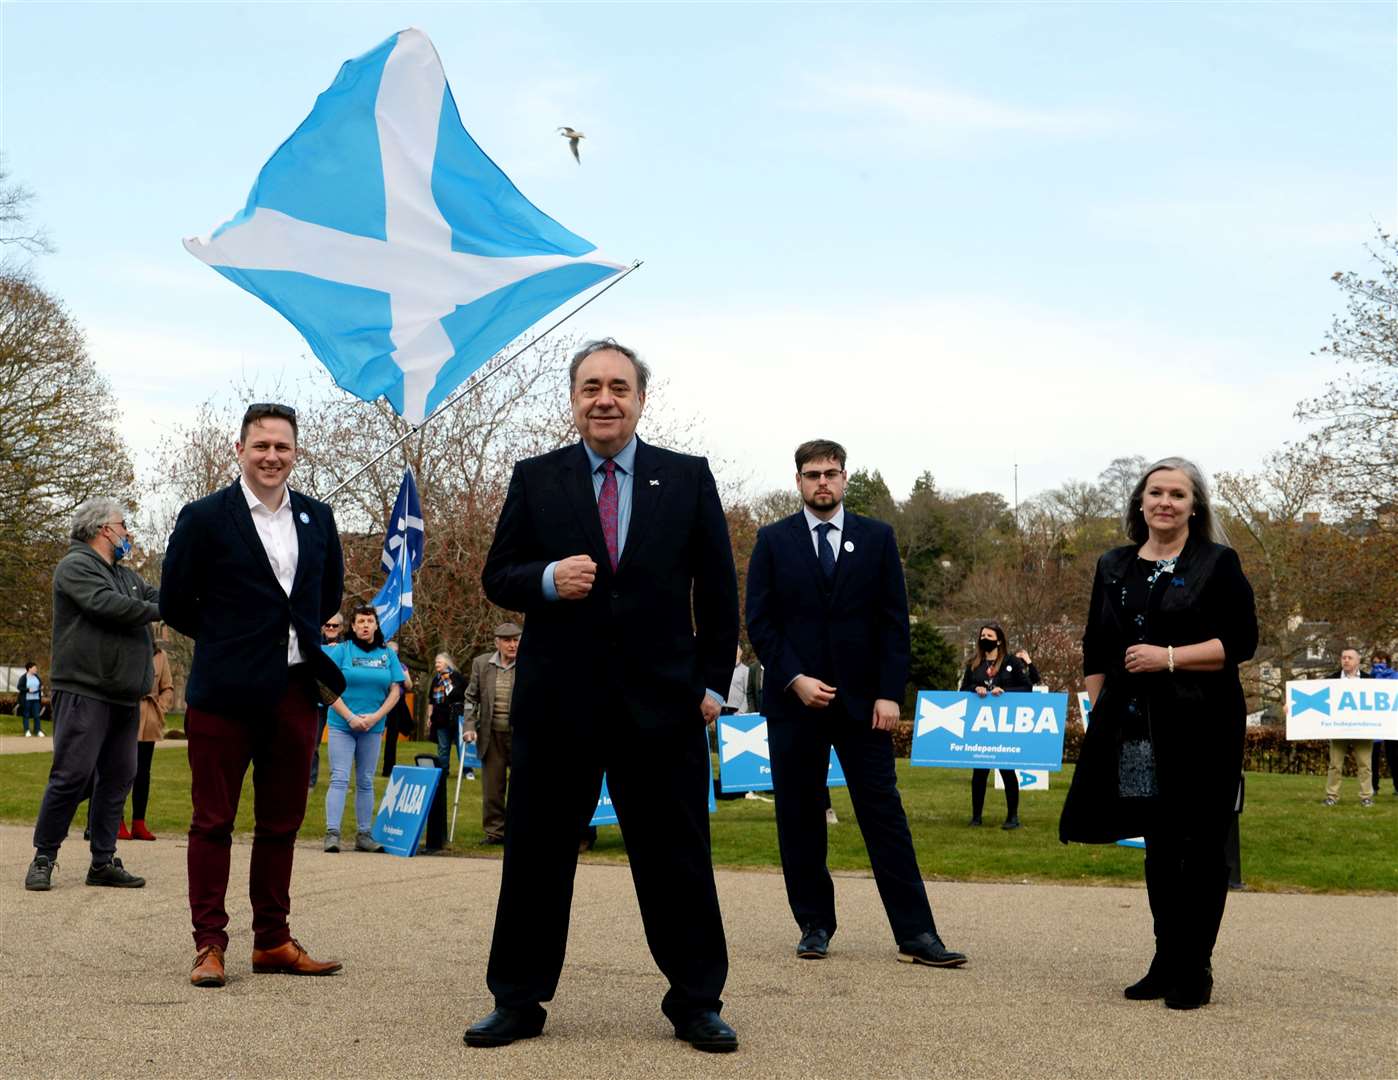 Alex Salmond launches the Alba Party's Highlands and Islands campaign with (from left) Kirk Torrance, Josh Robertson and Judith Reid.